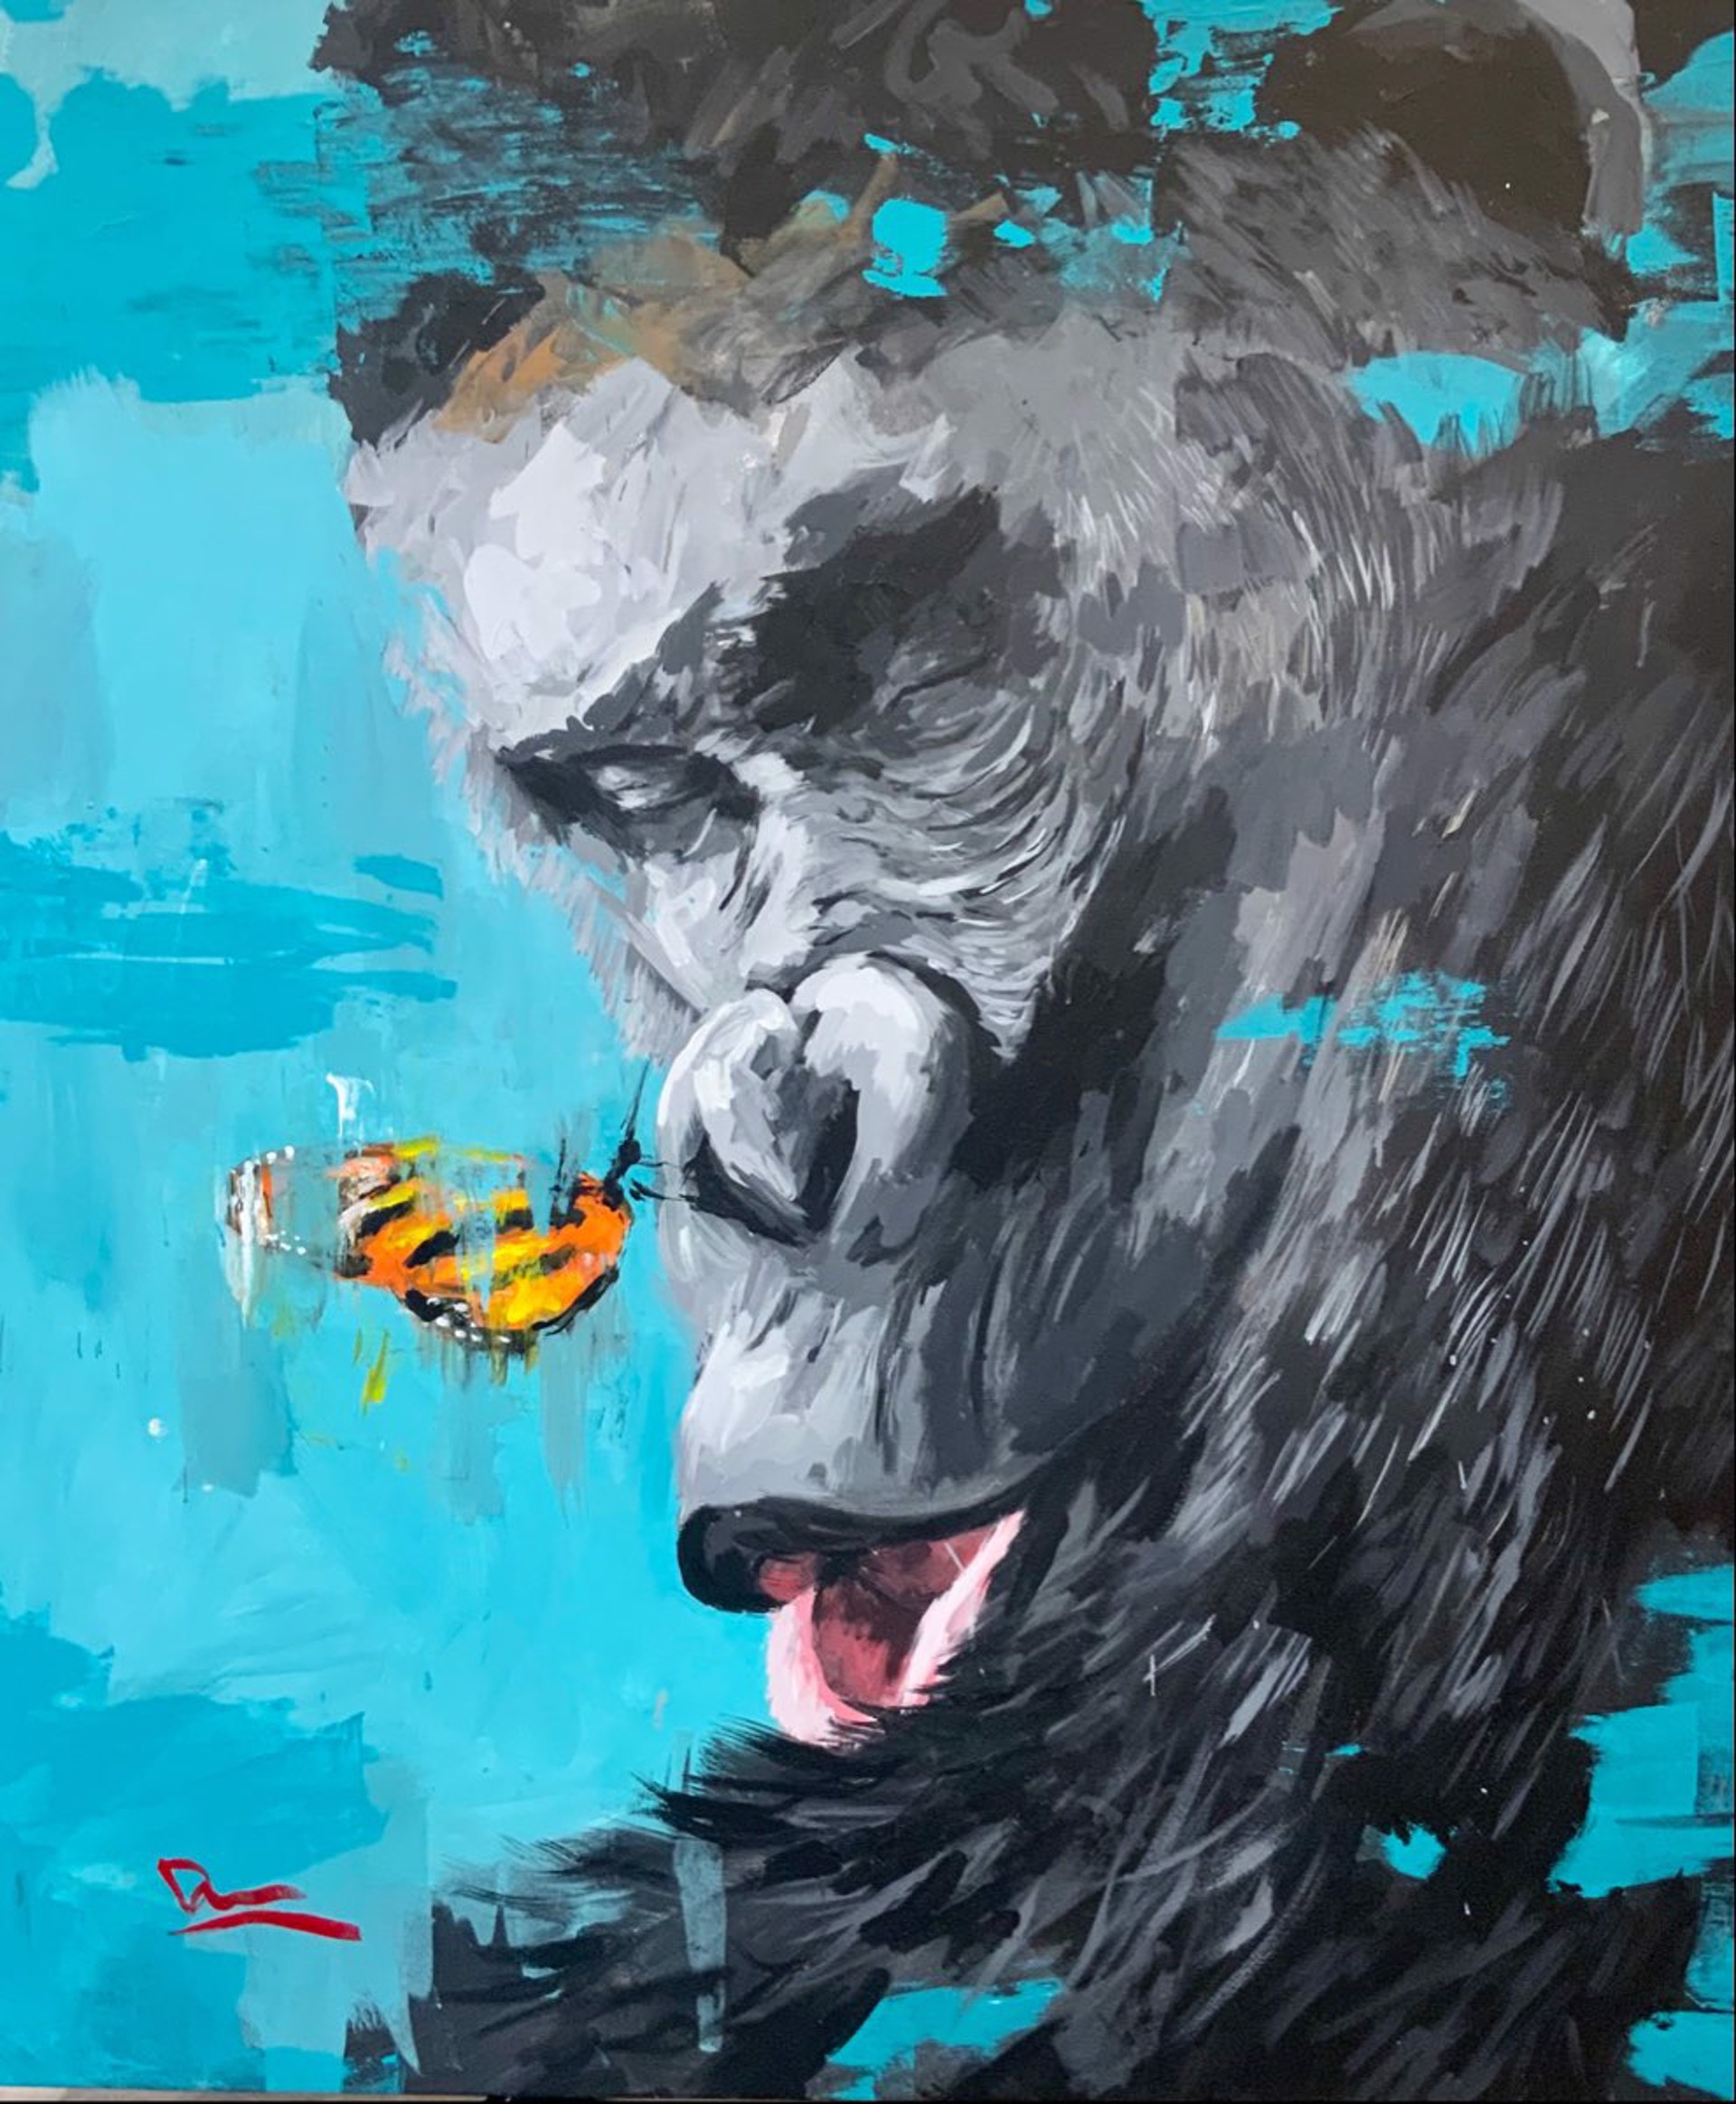 Gorilla and Butterfly by Dominic Mattioli